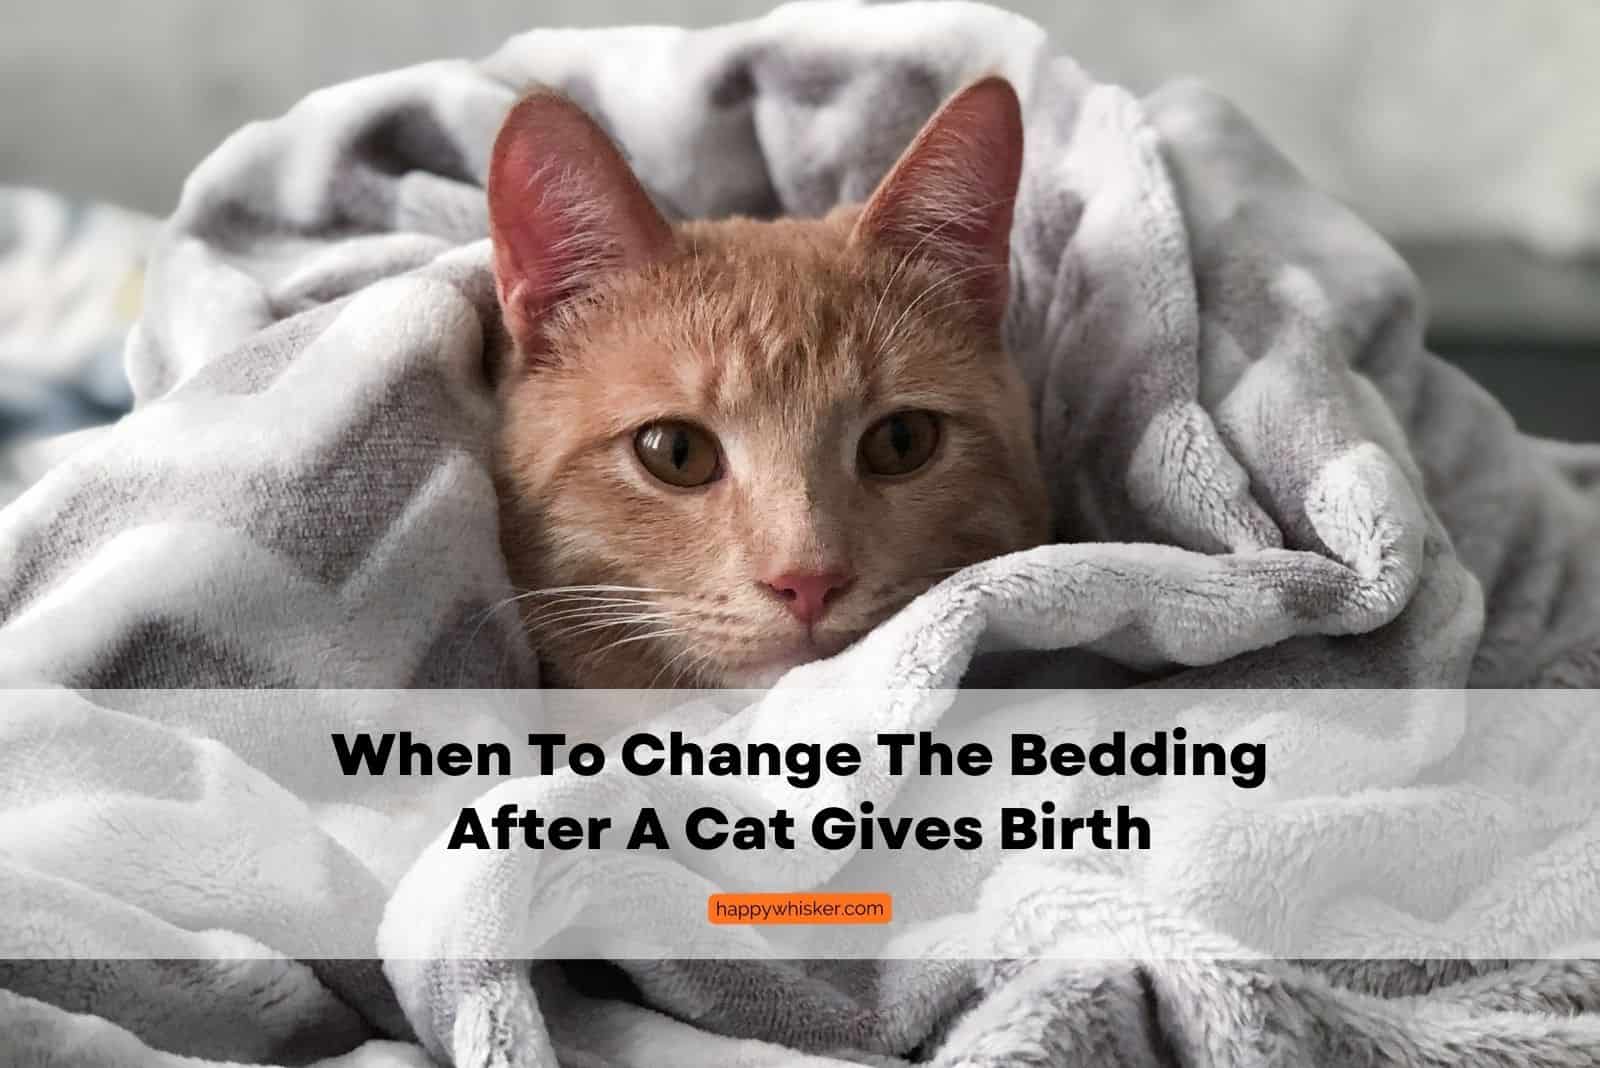 cat that has given birth is hiding in bedding